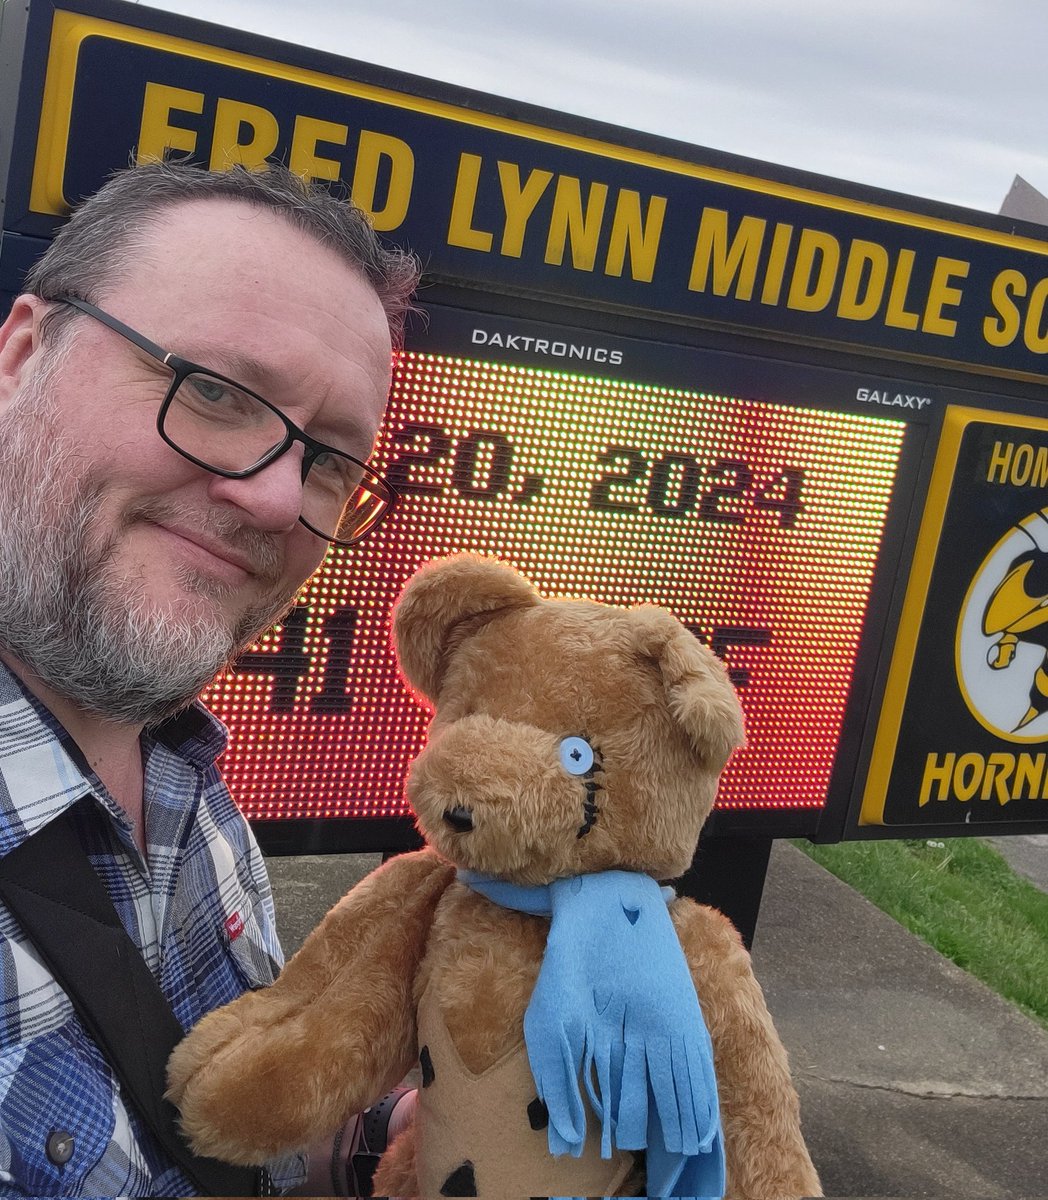 Books sold = new readers!

Thank you, Fred Lynn Comic Con, for being awesome thumbs 👍 

Adventures ahead!

#comics #comiccon #FredLynnComicCon
#letshuntmonstas